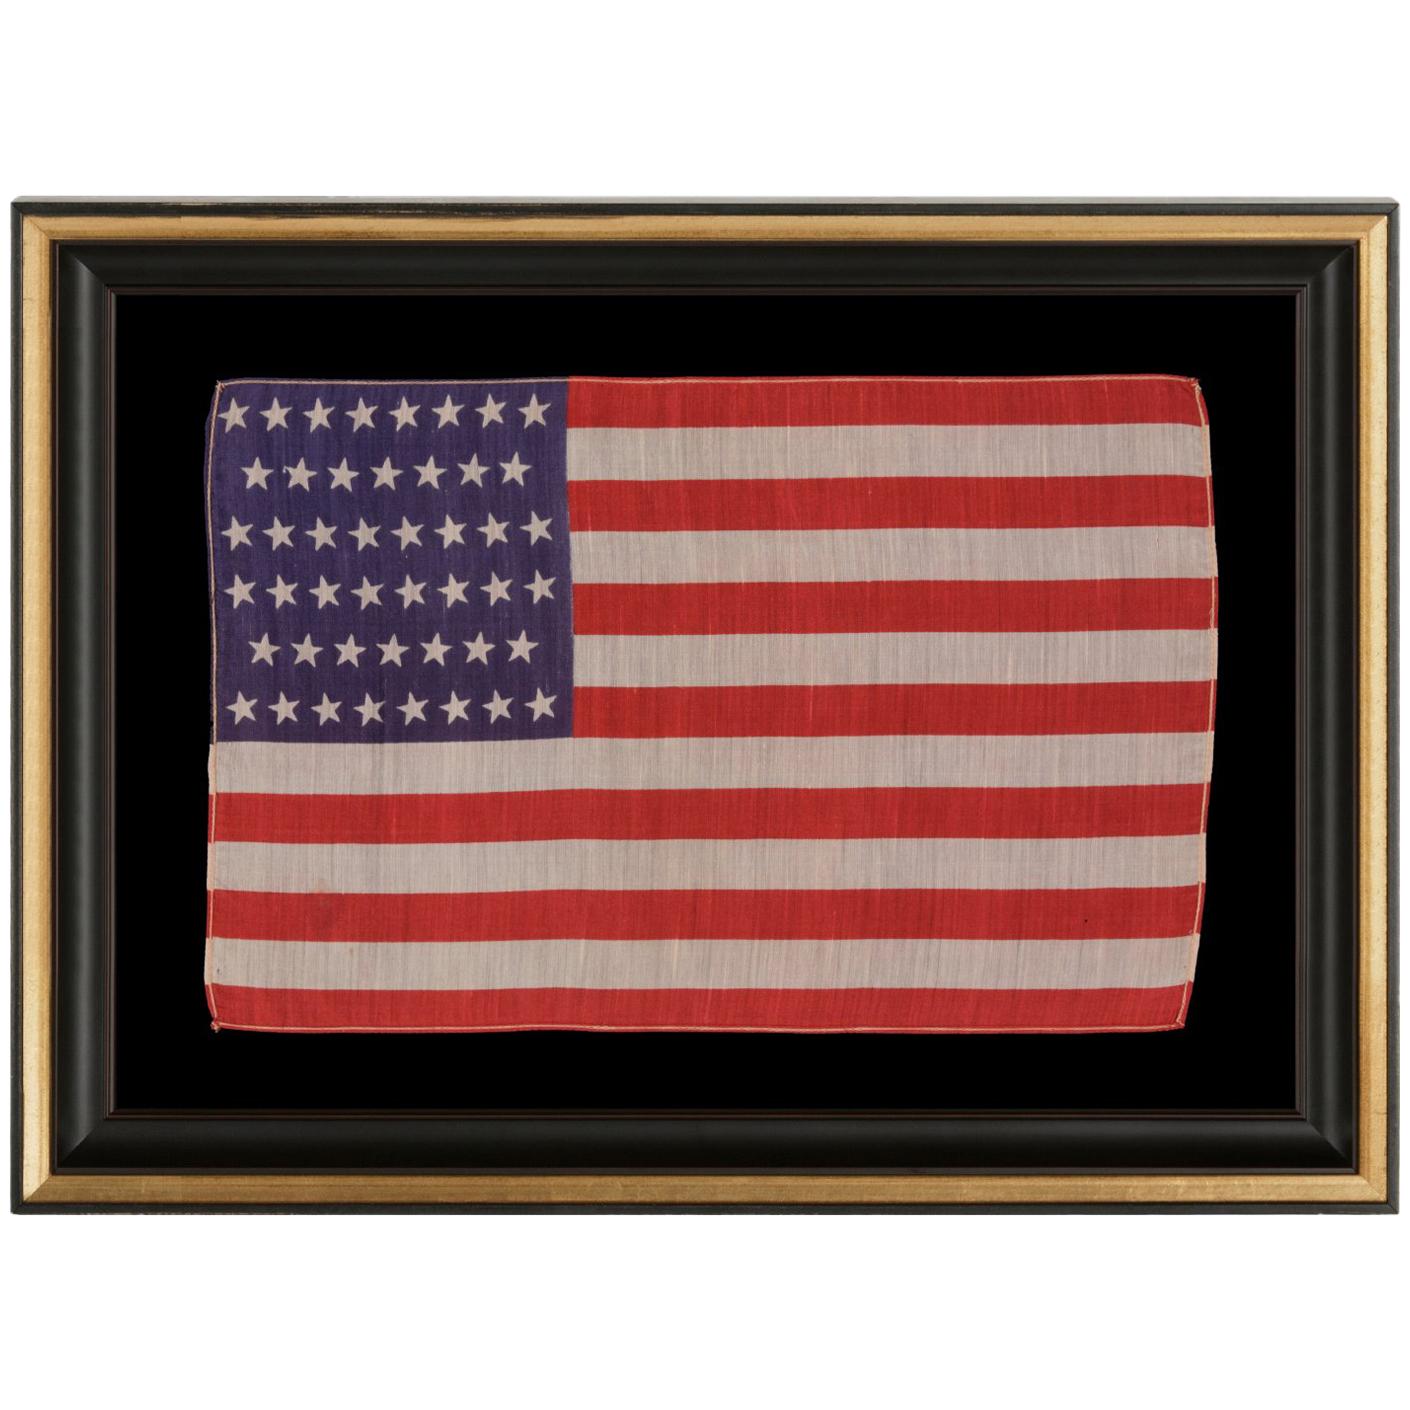 46 Stars in Canted Rows on an Antique American Parade Flag